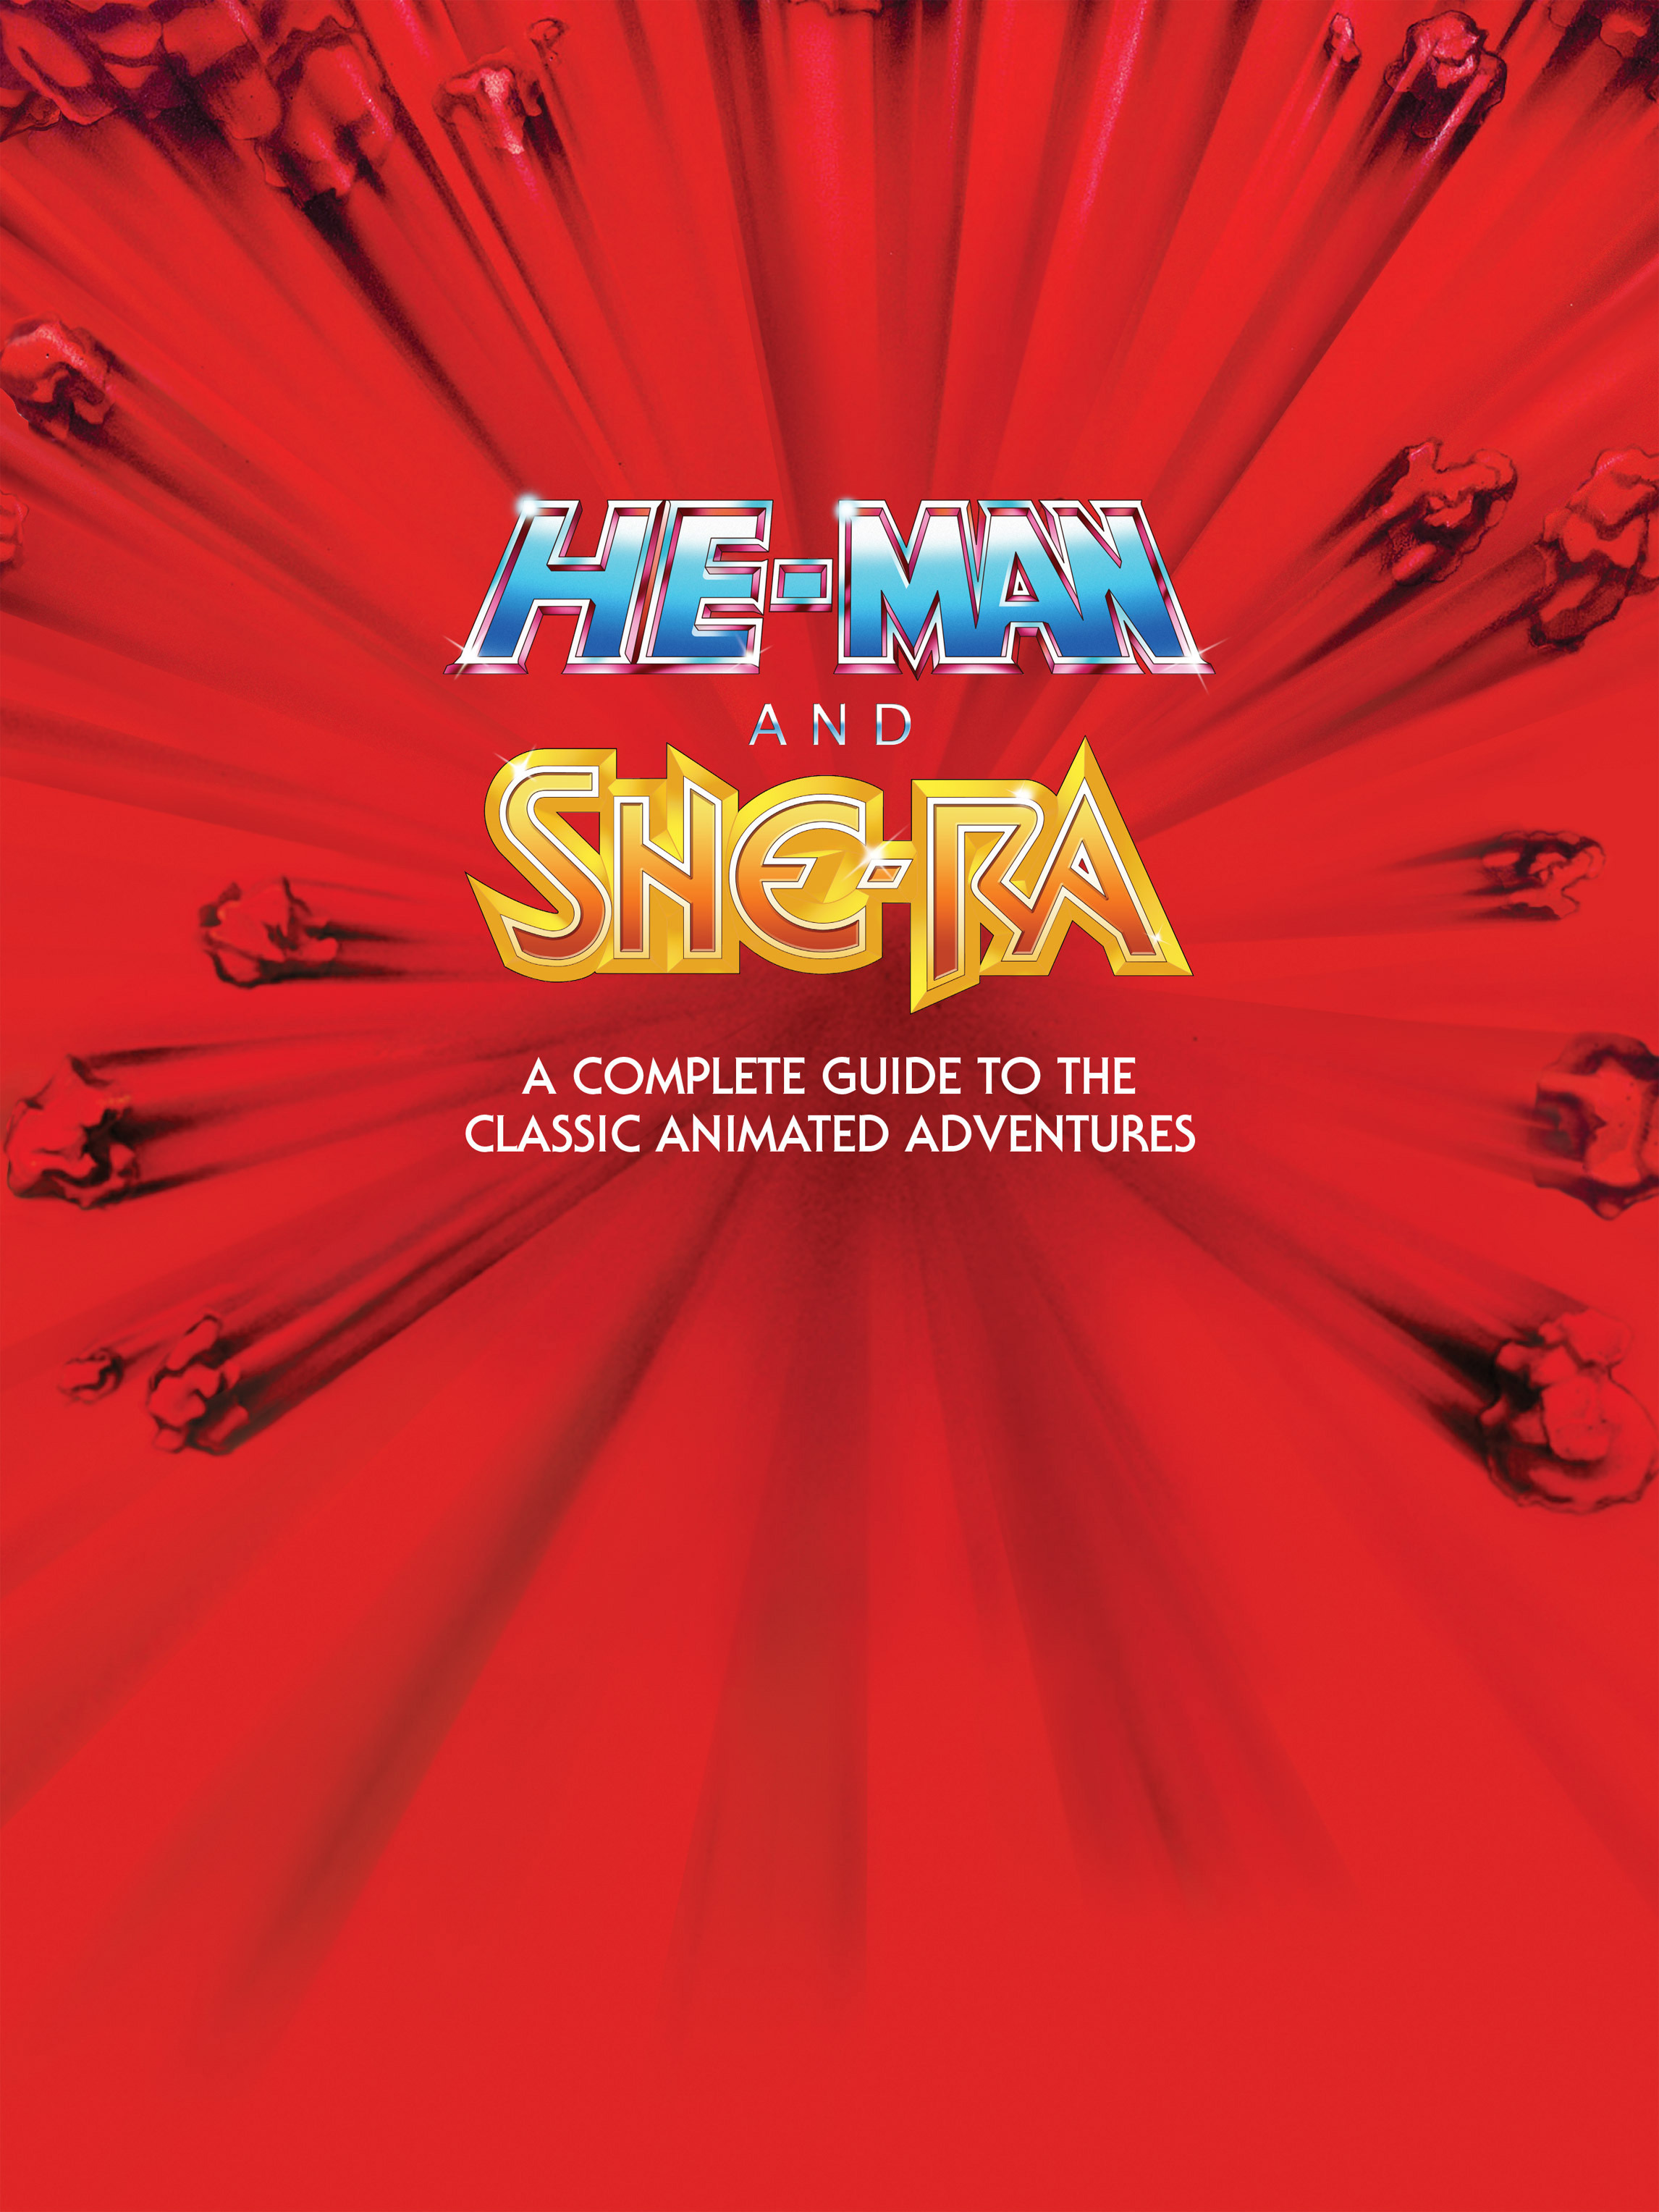 Read online He-Man and She-Ra: A Complete Guide to the Classic Animated Adventures comic -  Issue # TPB (Part 1) - 3